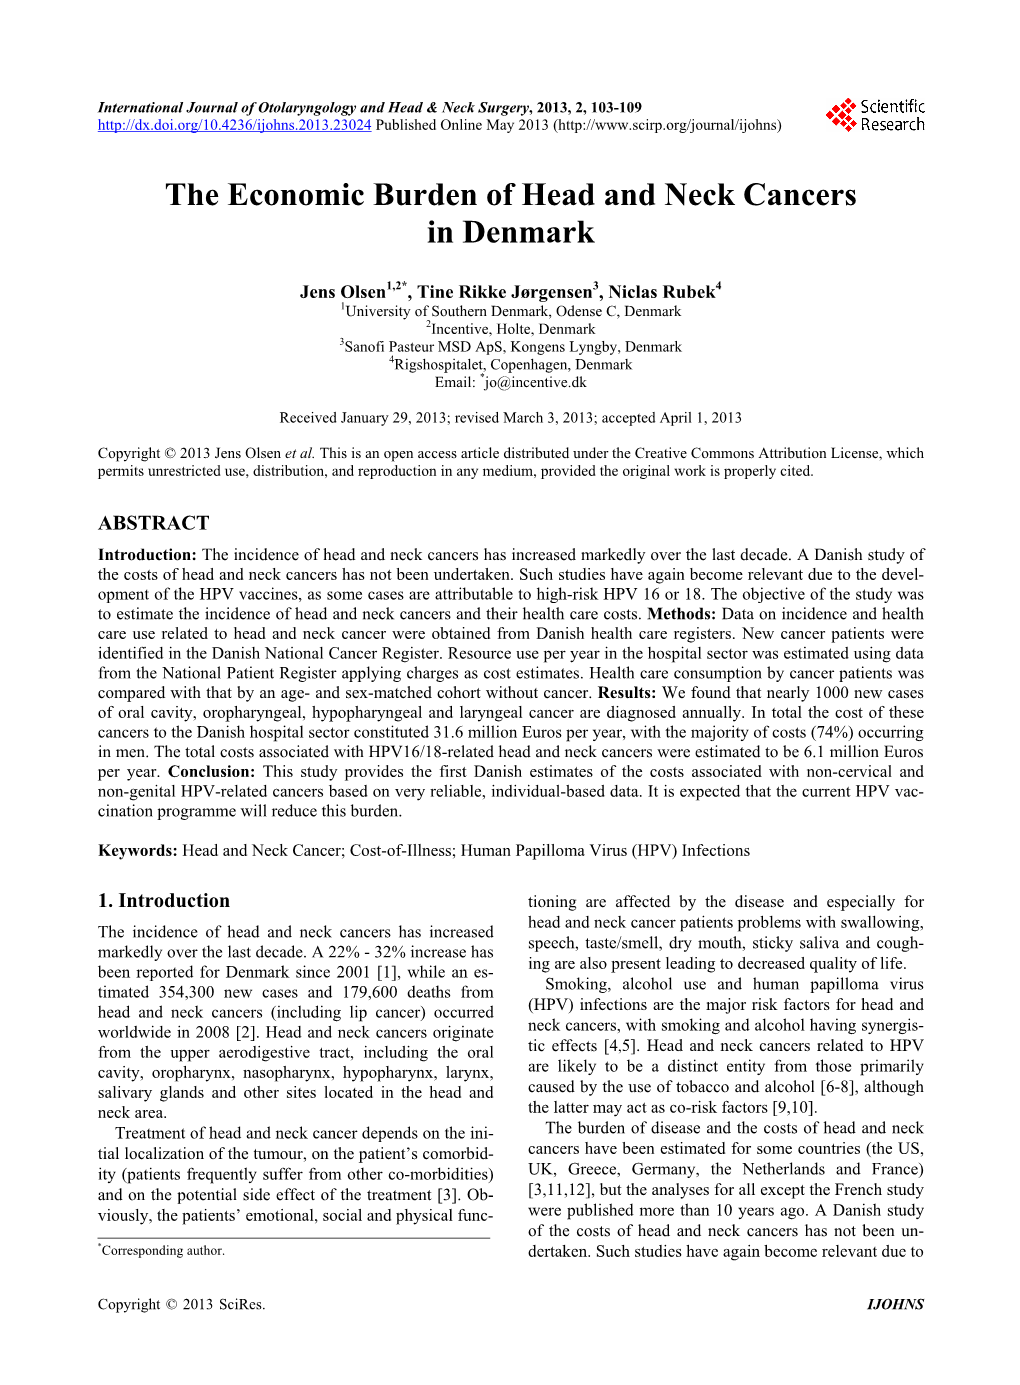 The Economic Burden of Head and Neck Cancers in Denmark